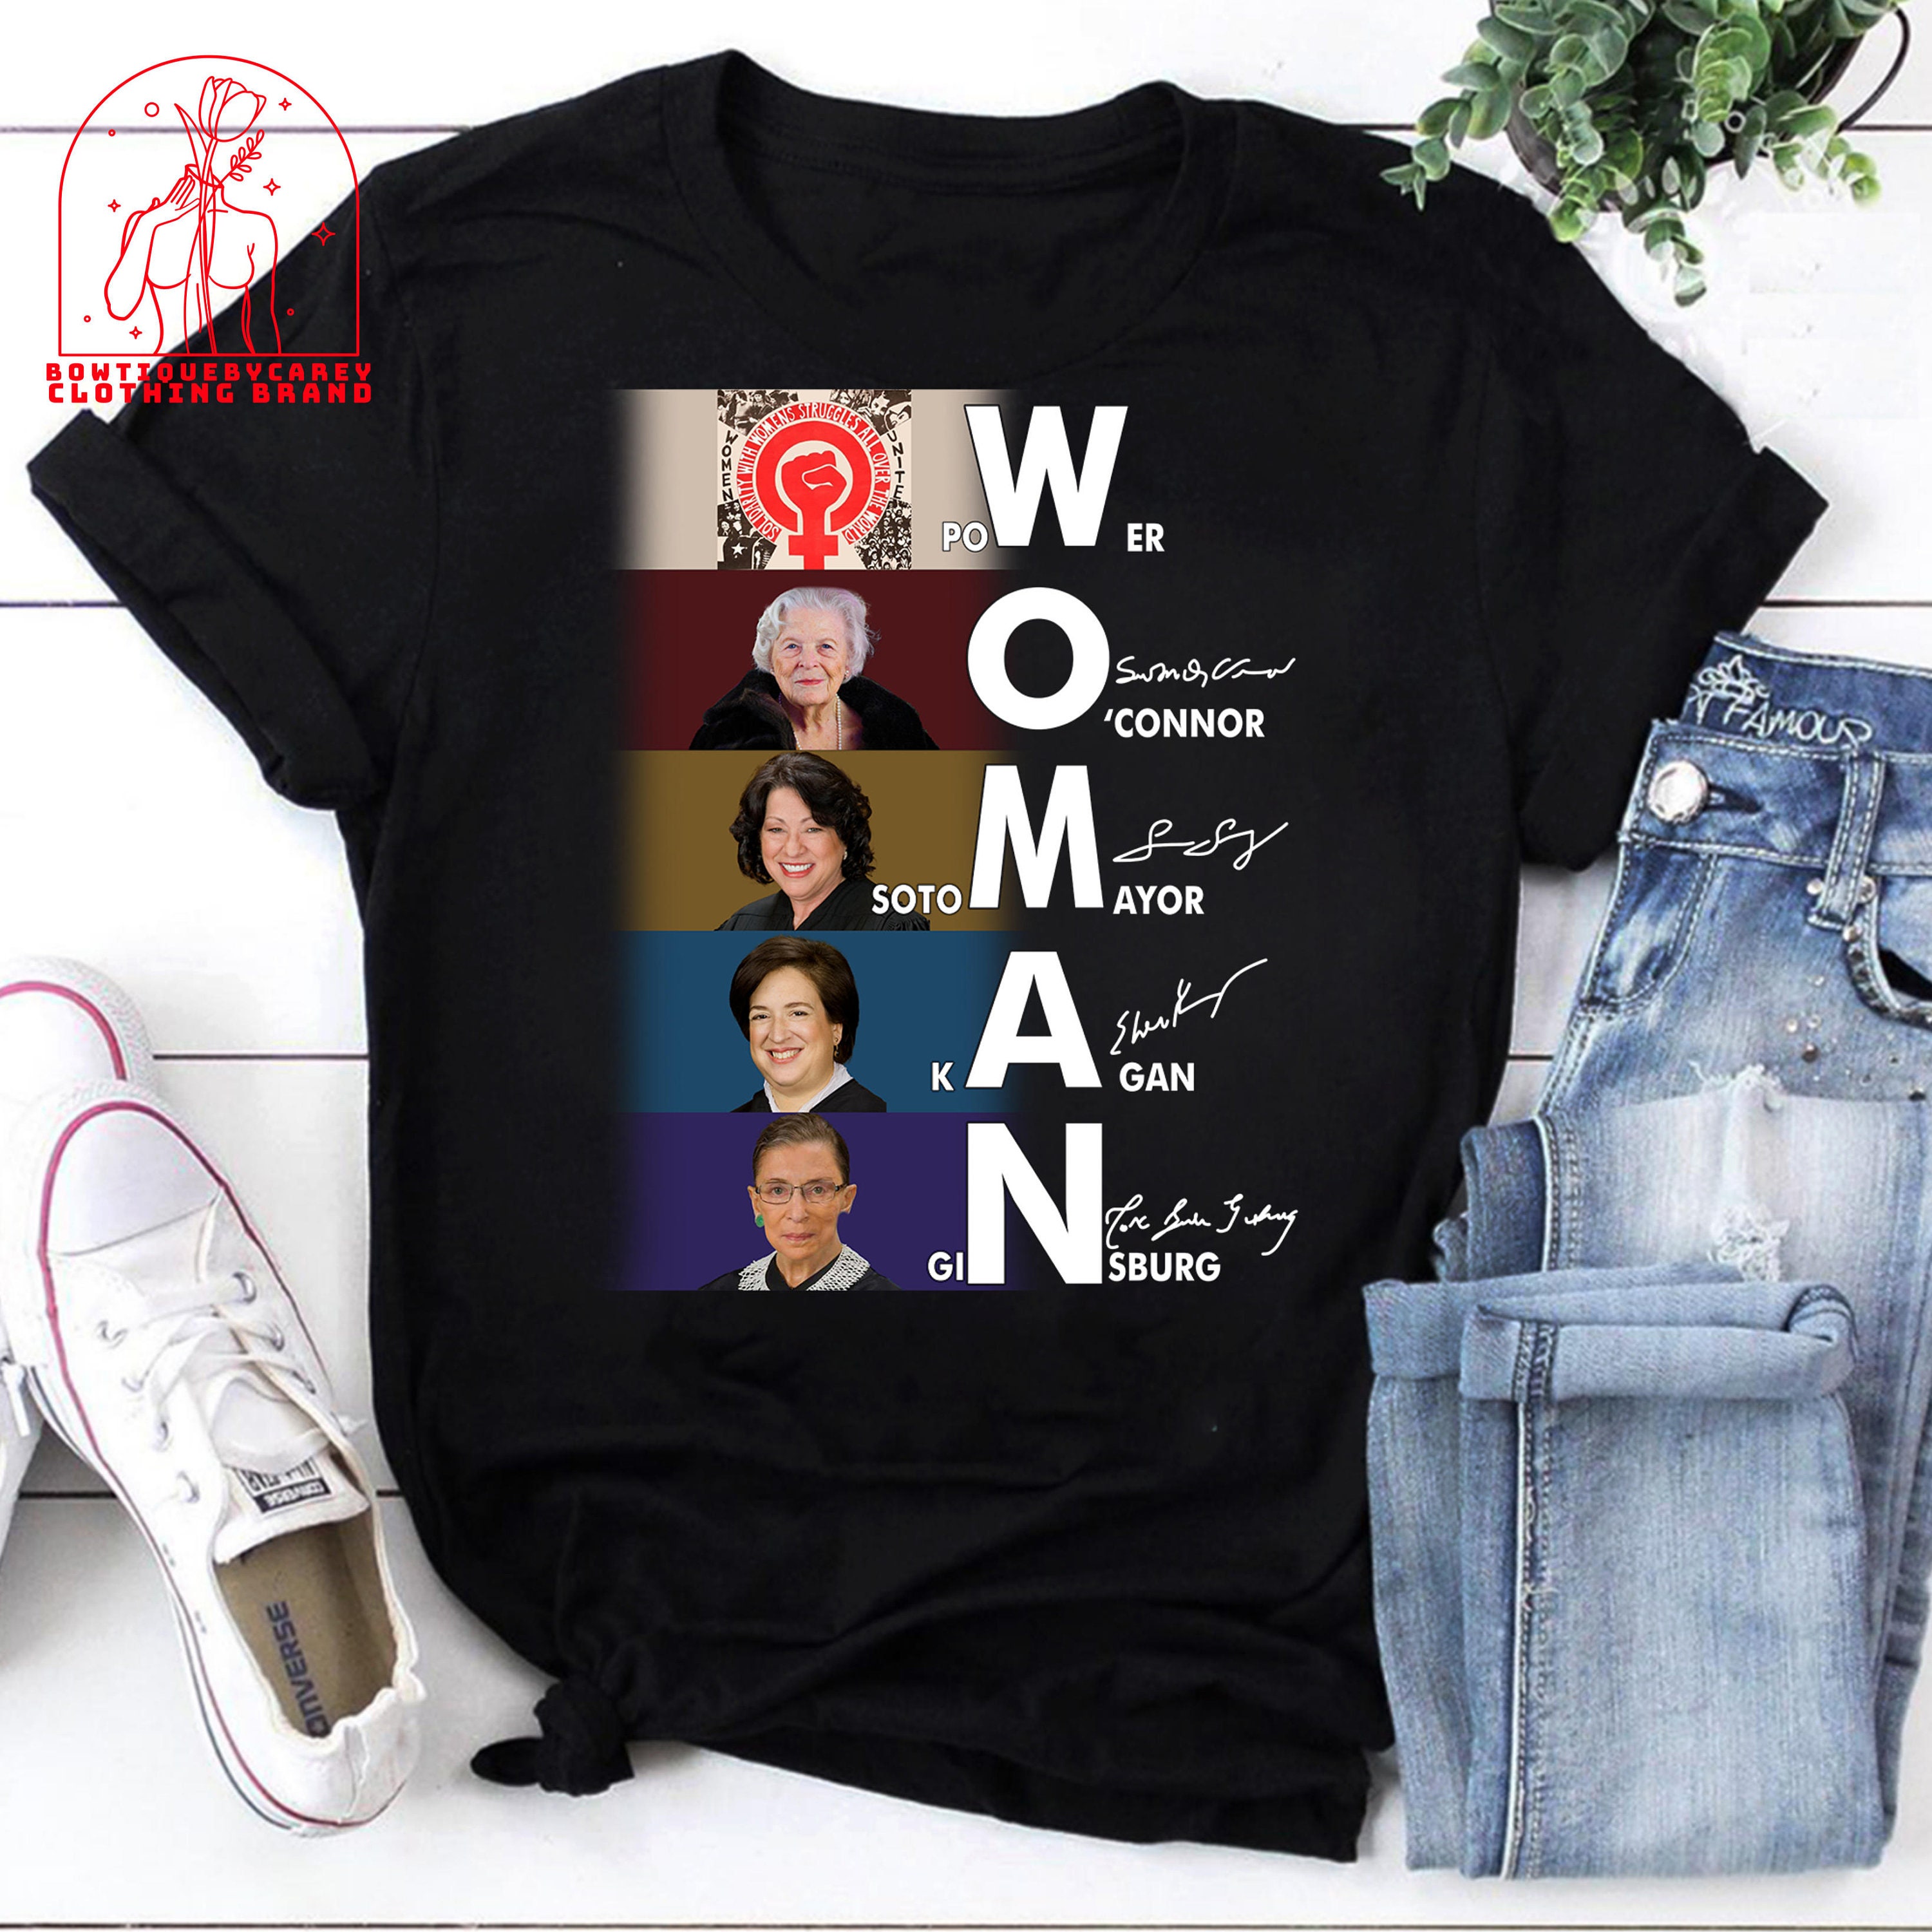 Woman Power O'connor Soto Mayor Kagan Ginsburg Woman Rights Feminist Court Of Justice Unisex T-Shirt